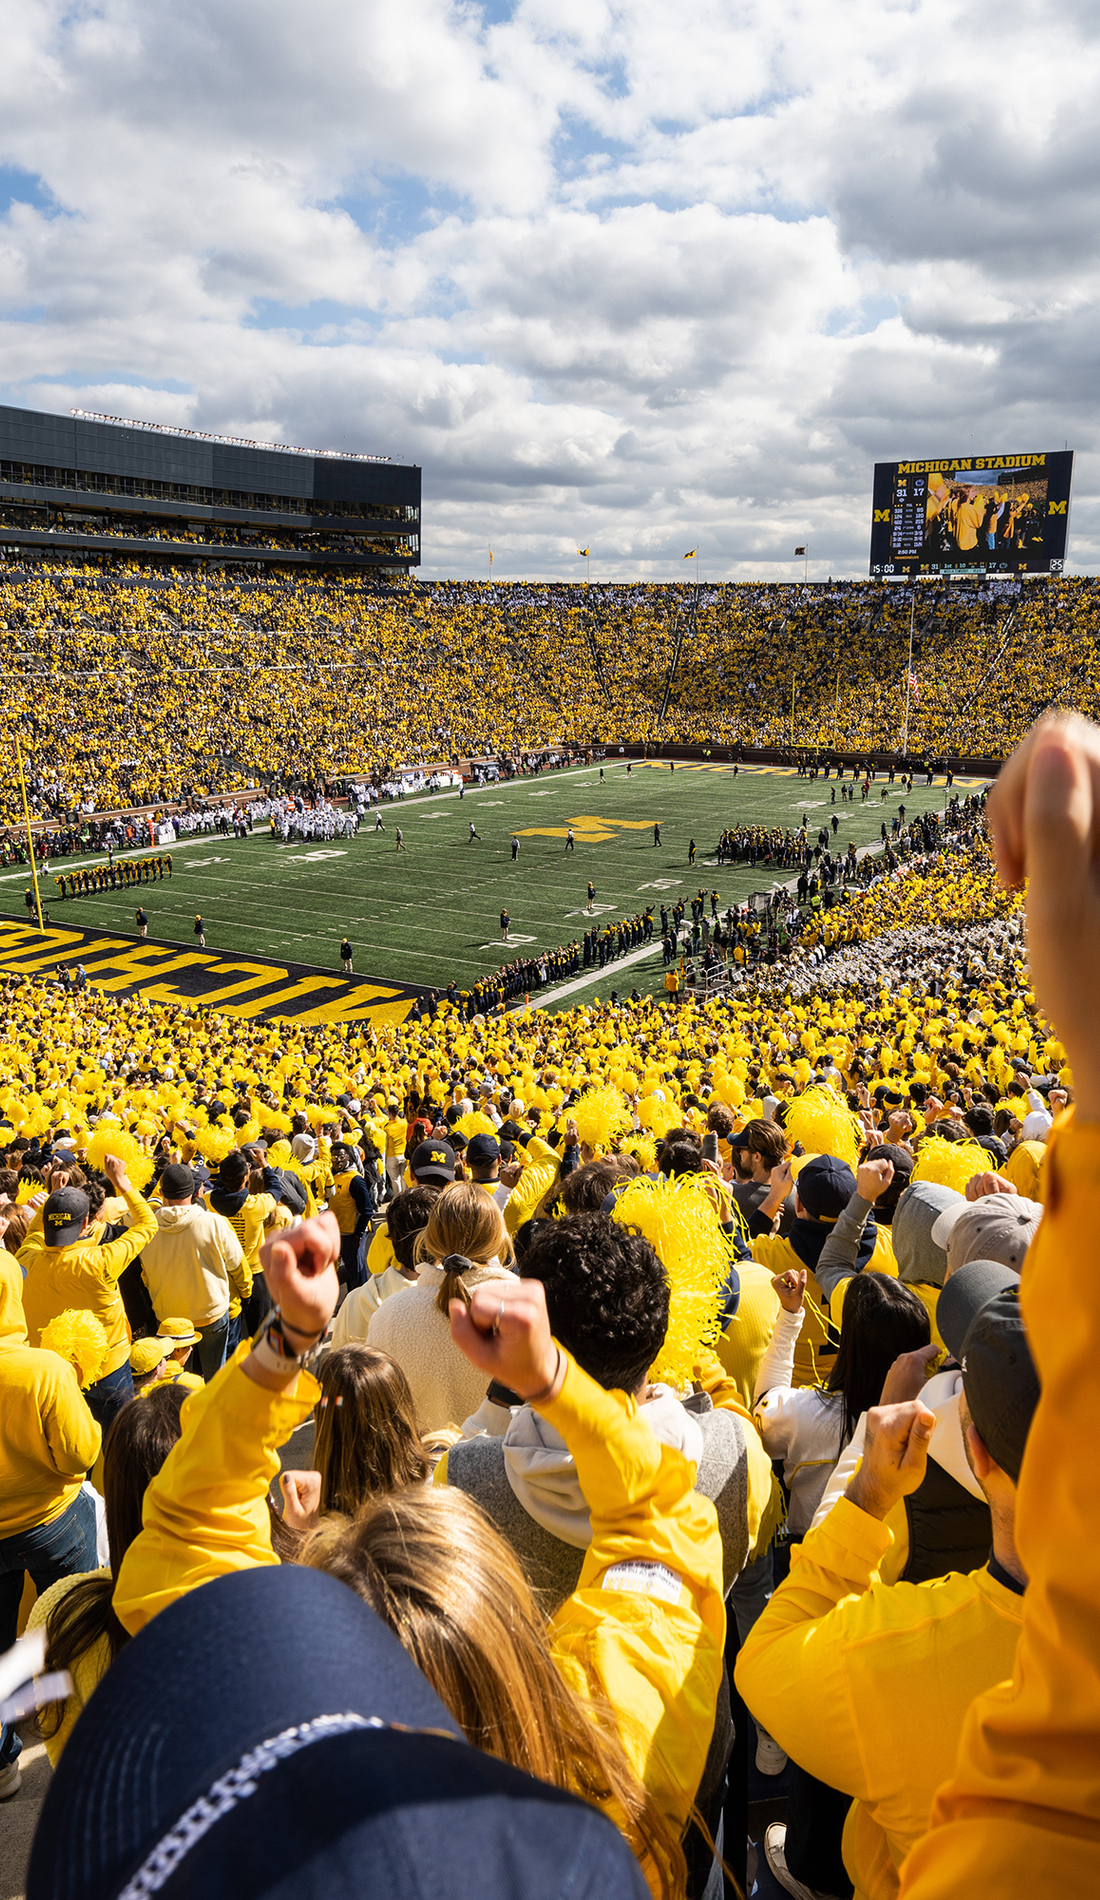 A Michigan Wolverines Football live event